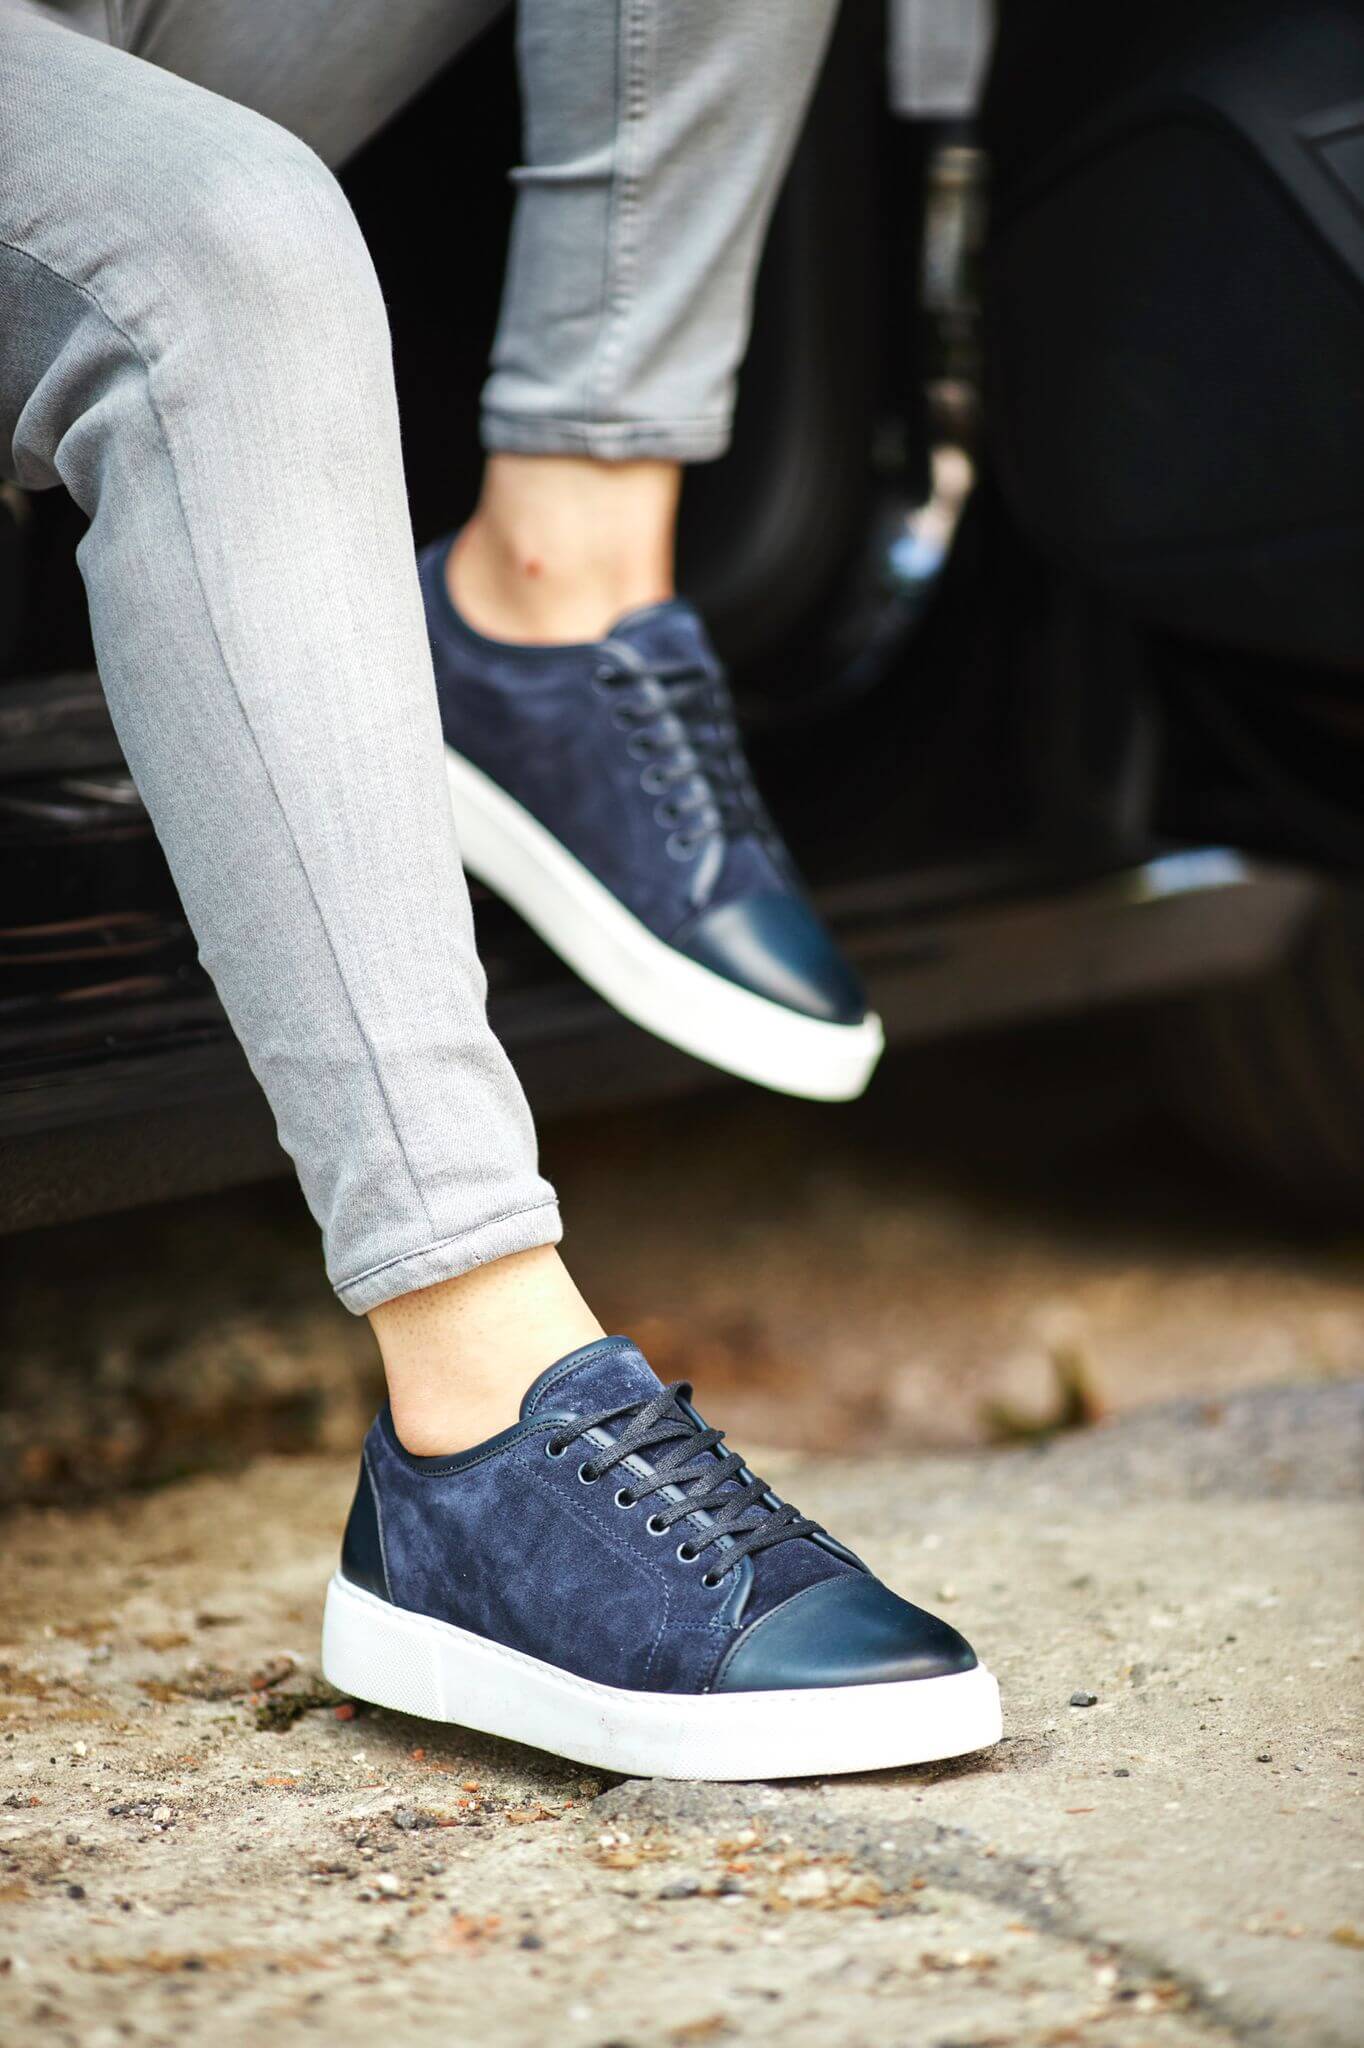 A Navy Blue Lace up Sneaker on display.